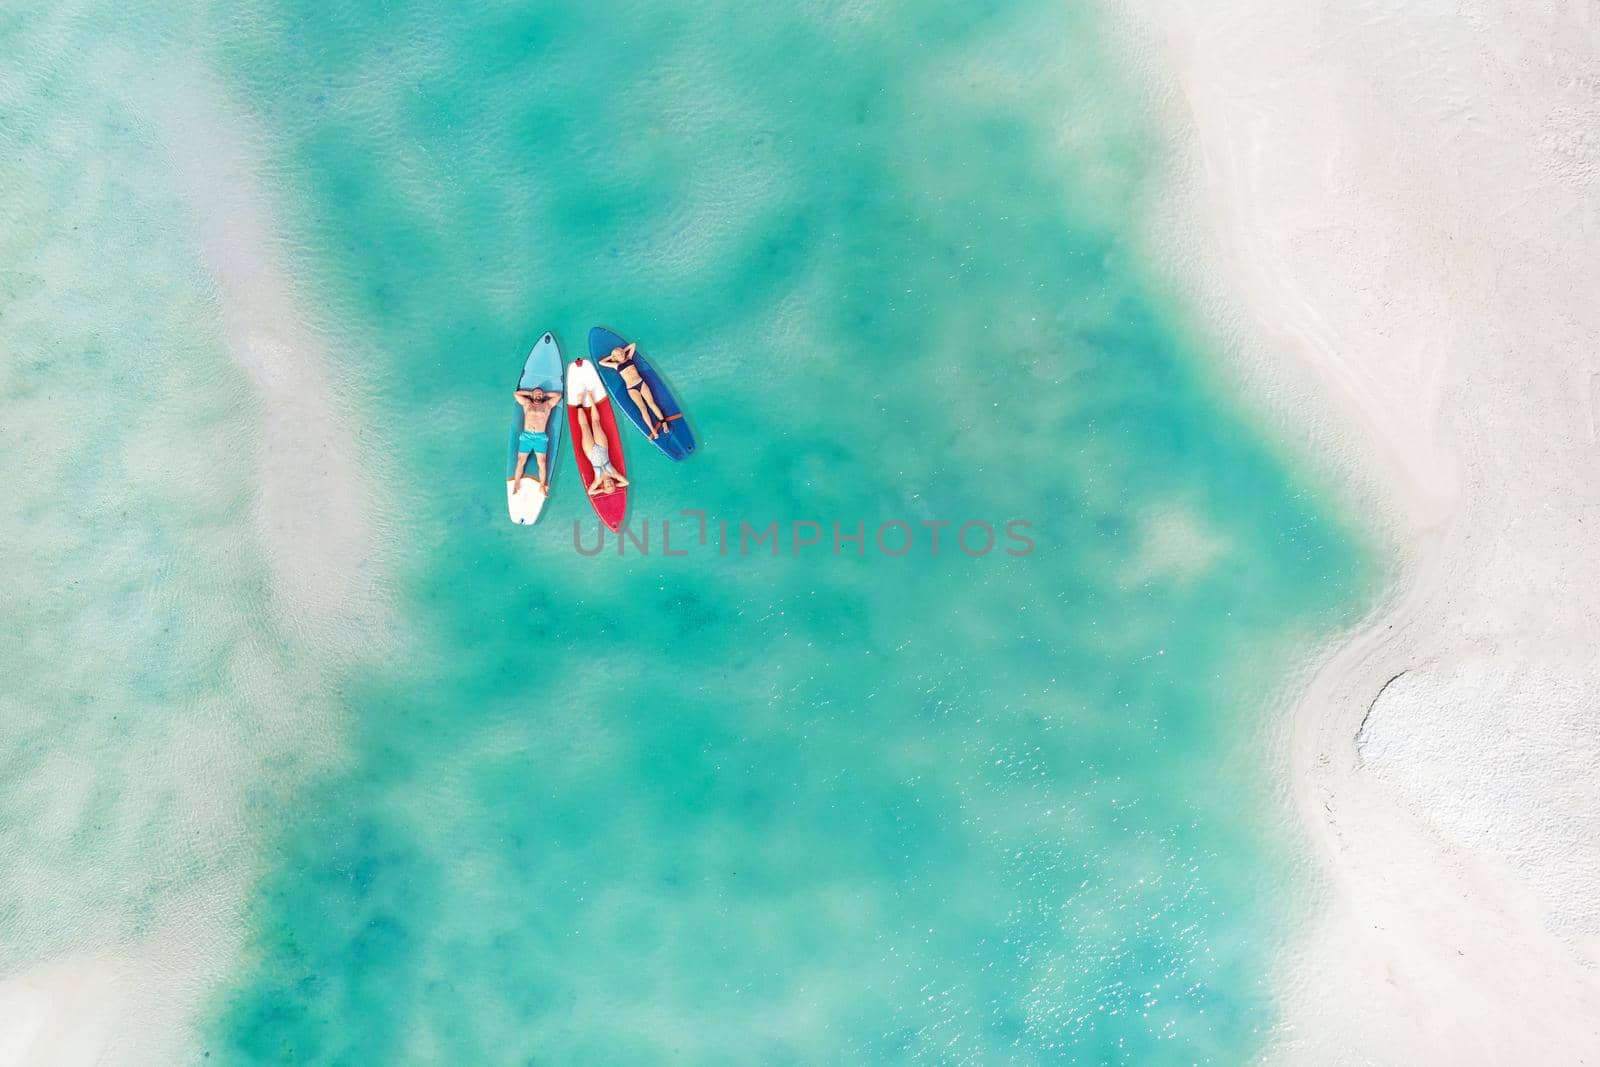 The family is resting lying on Sup boards in the turquoise sea. Three people ride sup boards in the ocean near the beach by Lobachad